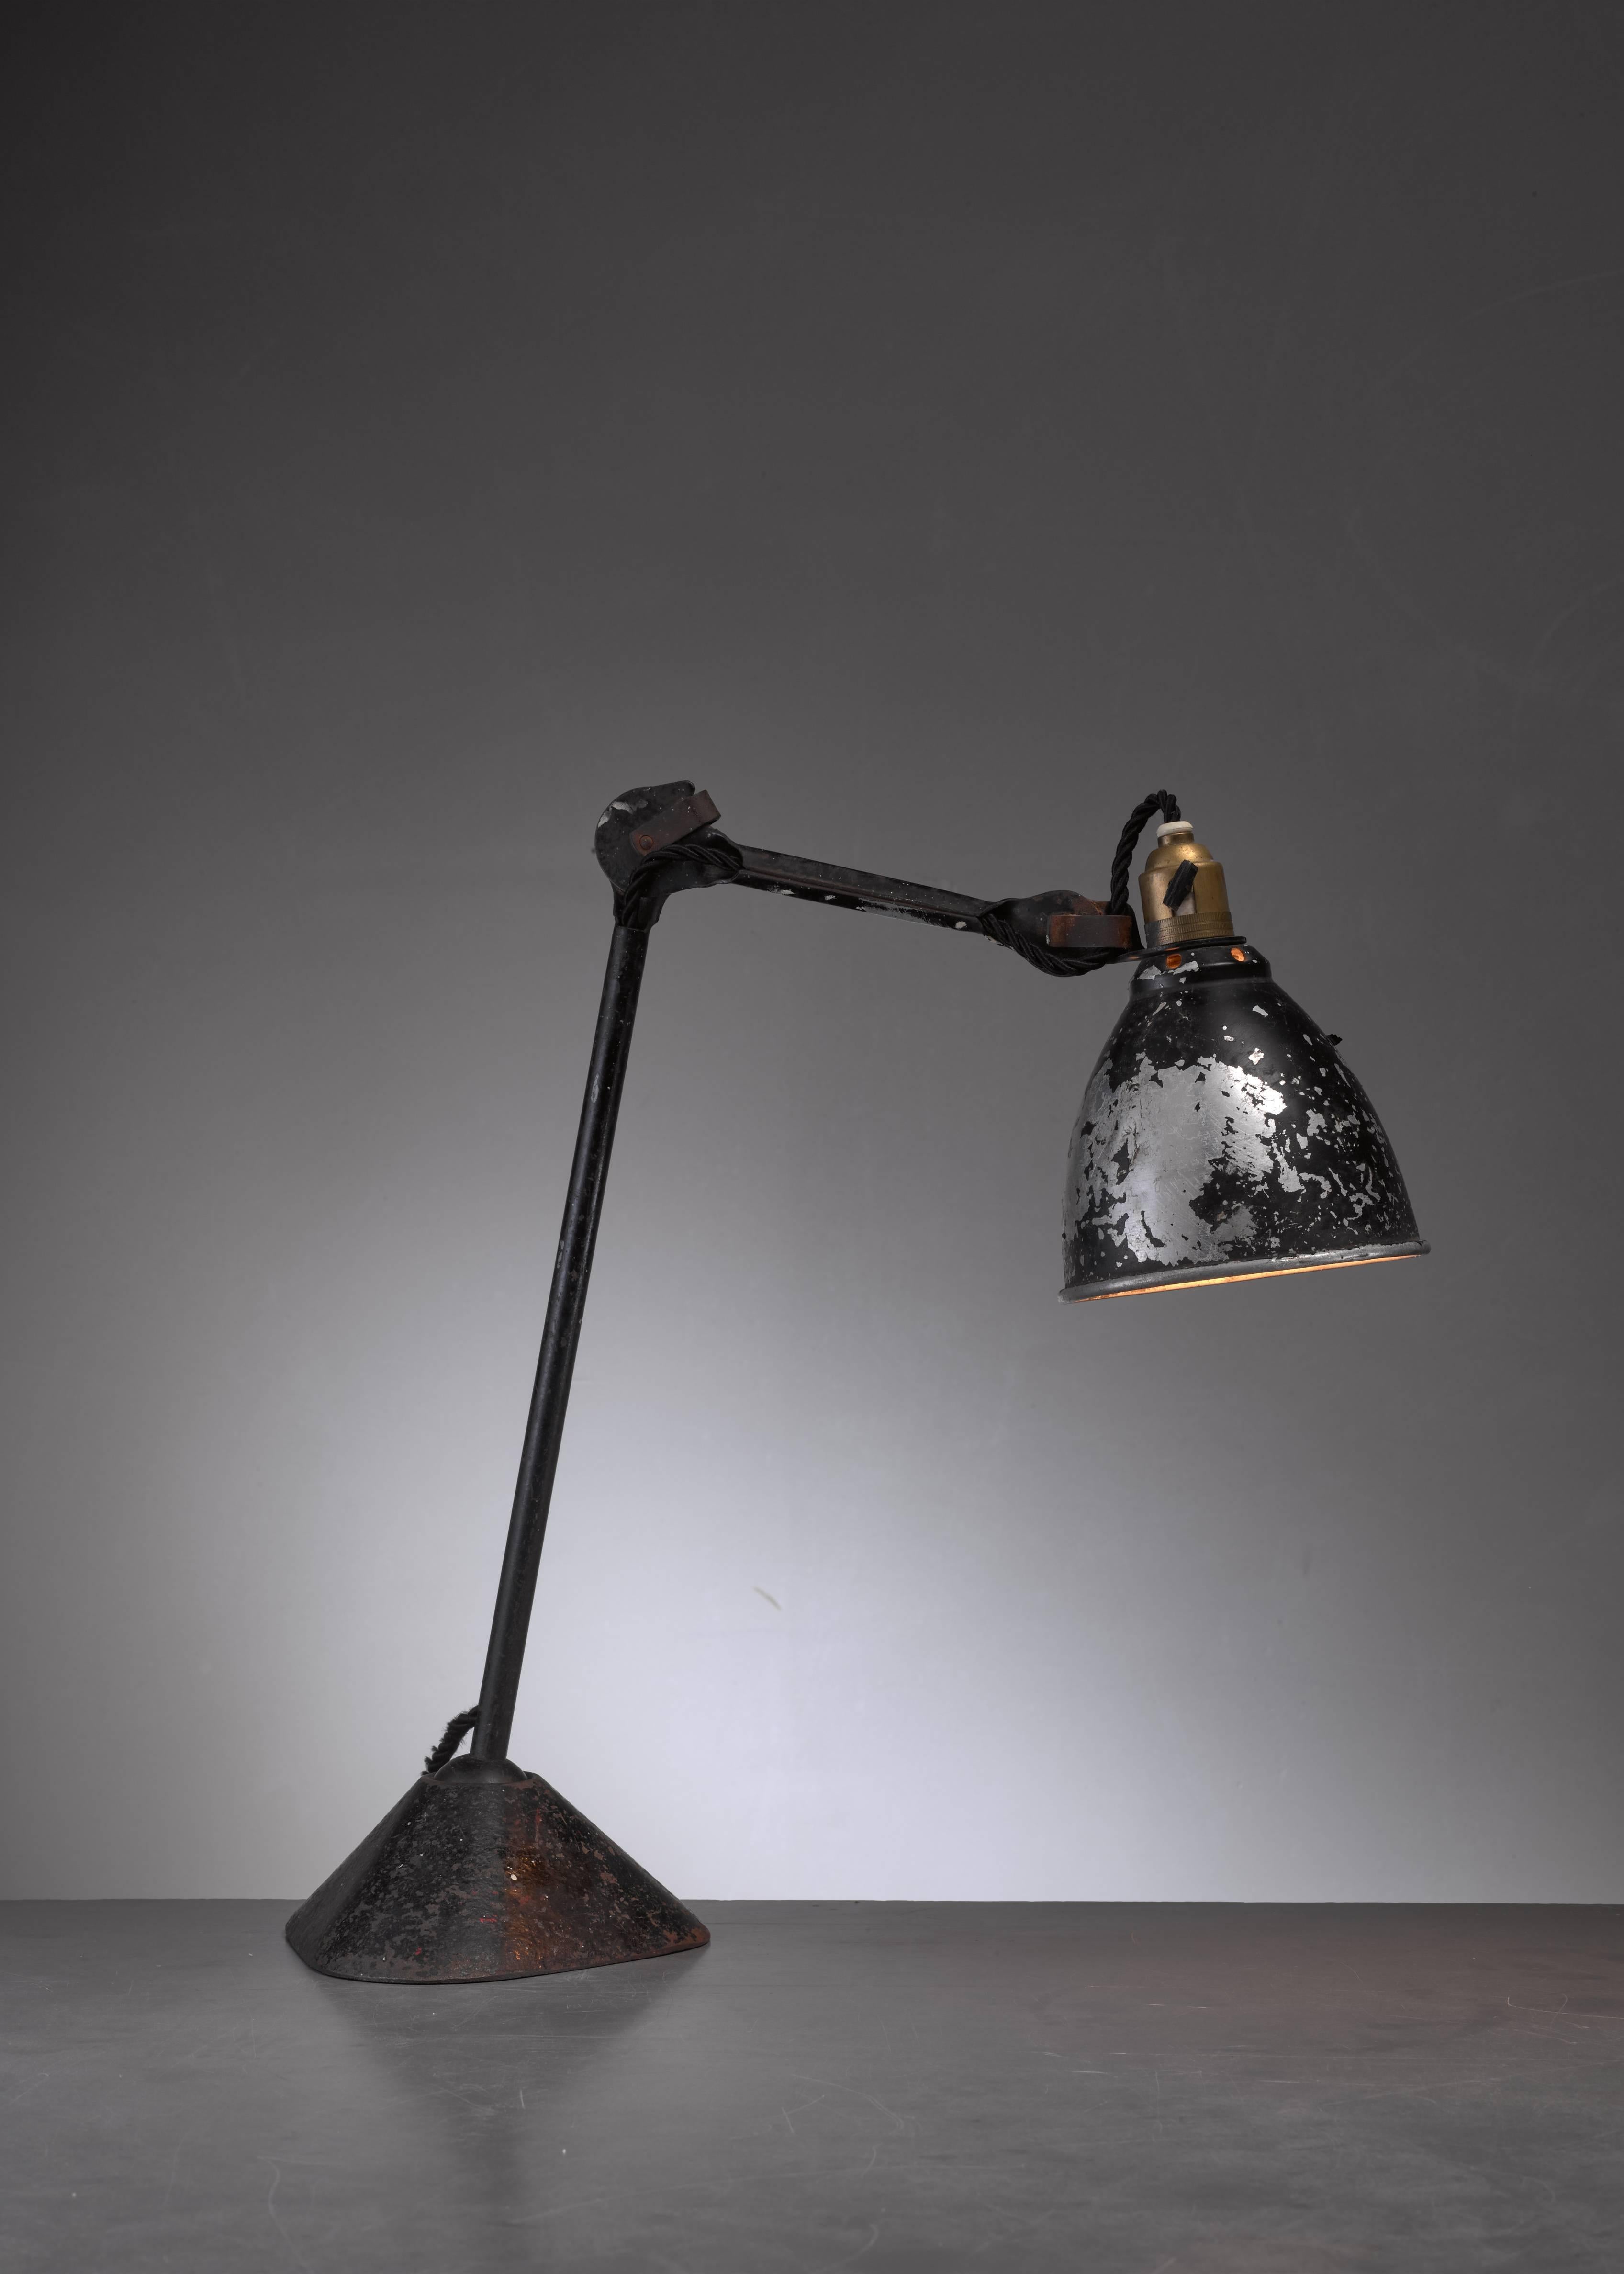 The iconic Lampe Gras model 205 table lamp was designed in 1921 by Bernard-Albin Gras and produced by Didier des Gachons & Ravel. The ball-joint connection in the foot allows you to position the stem in any desired angle.